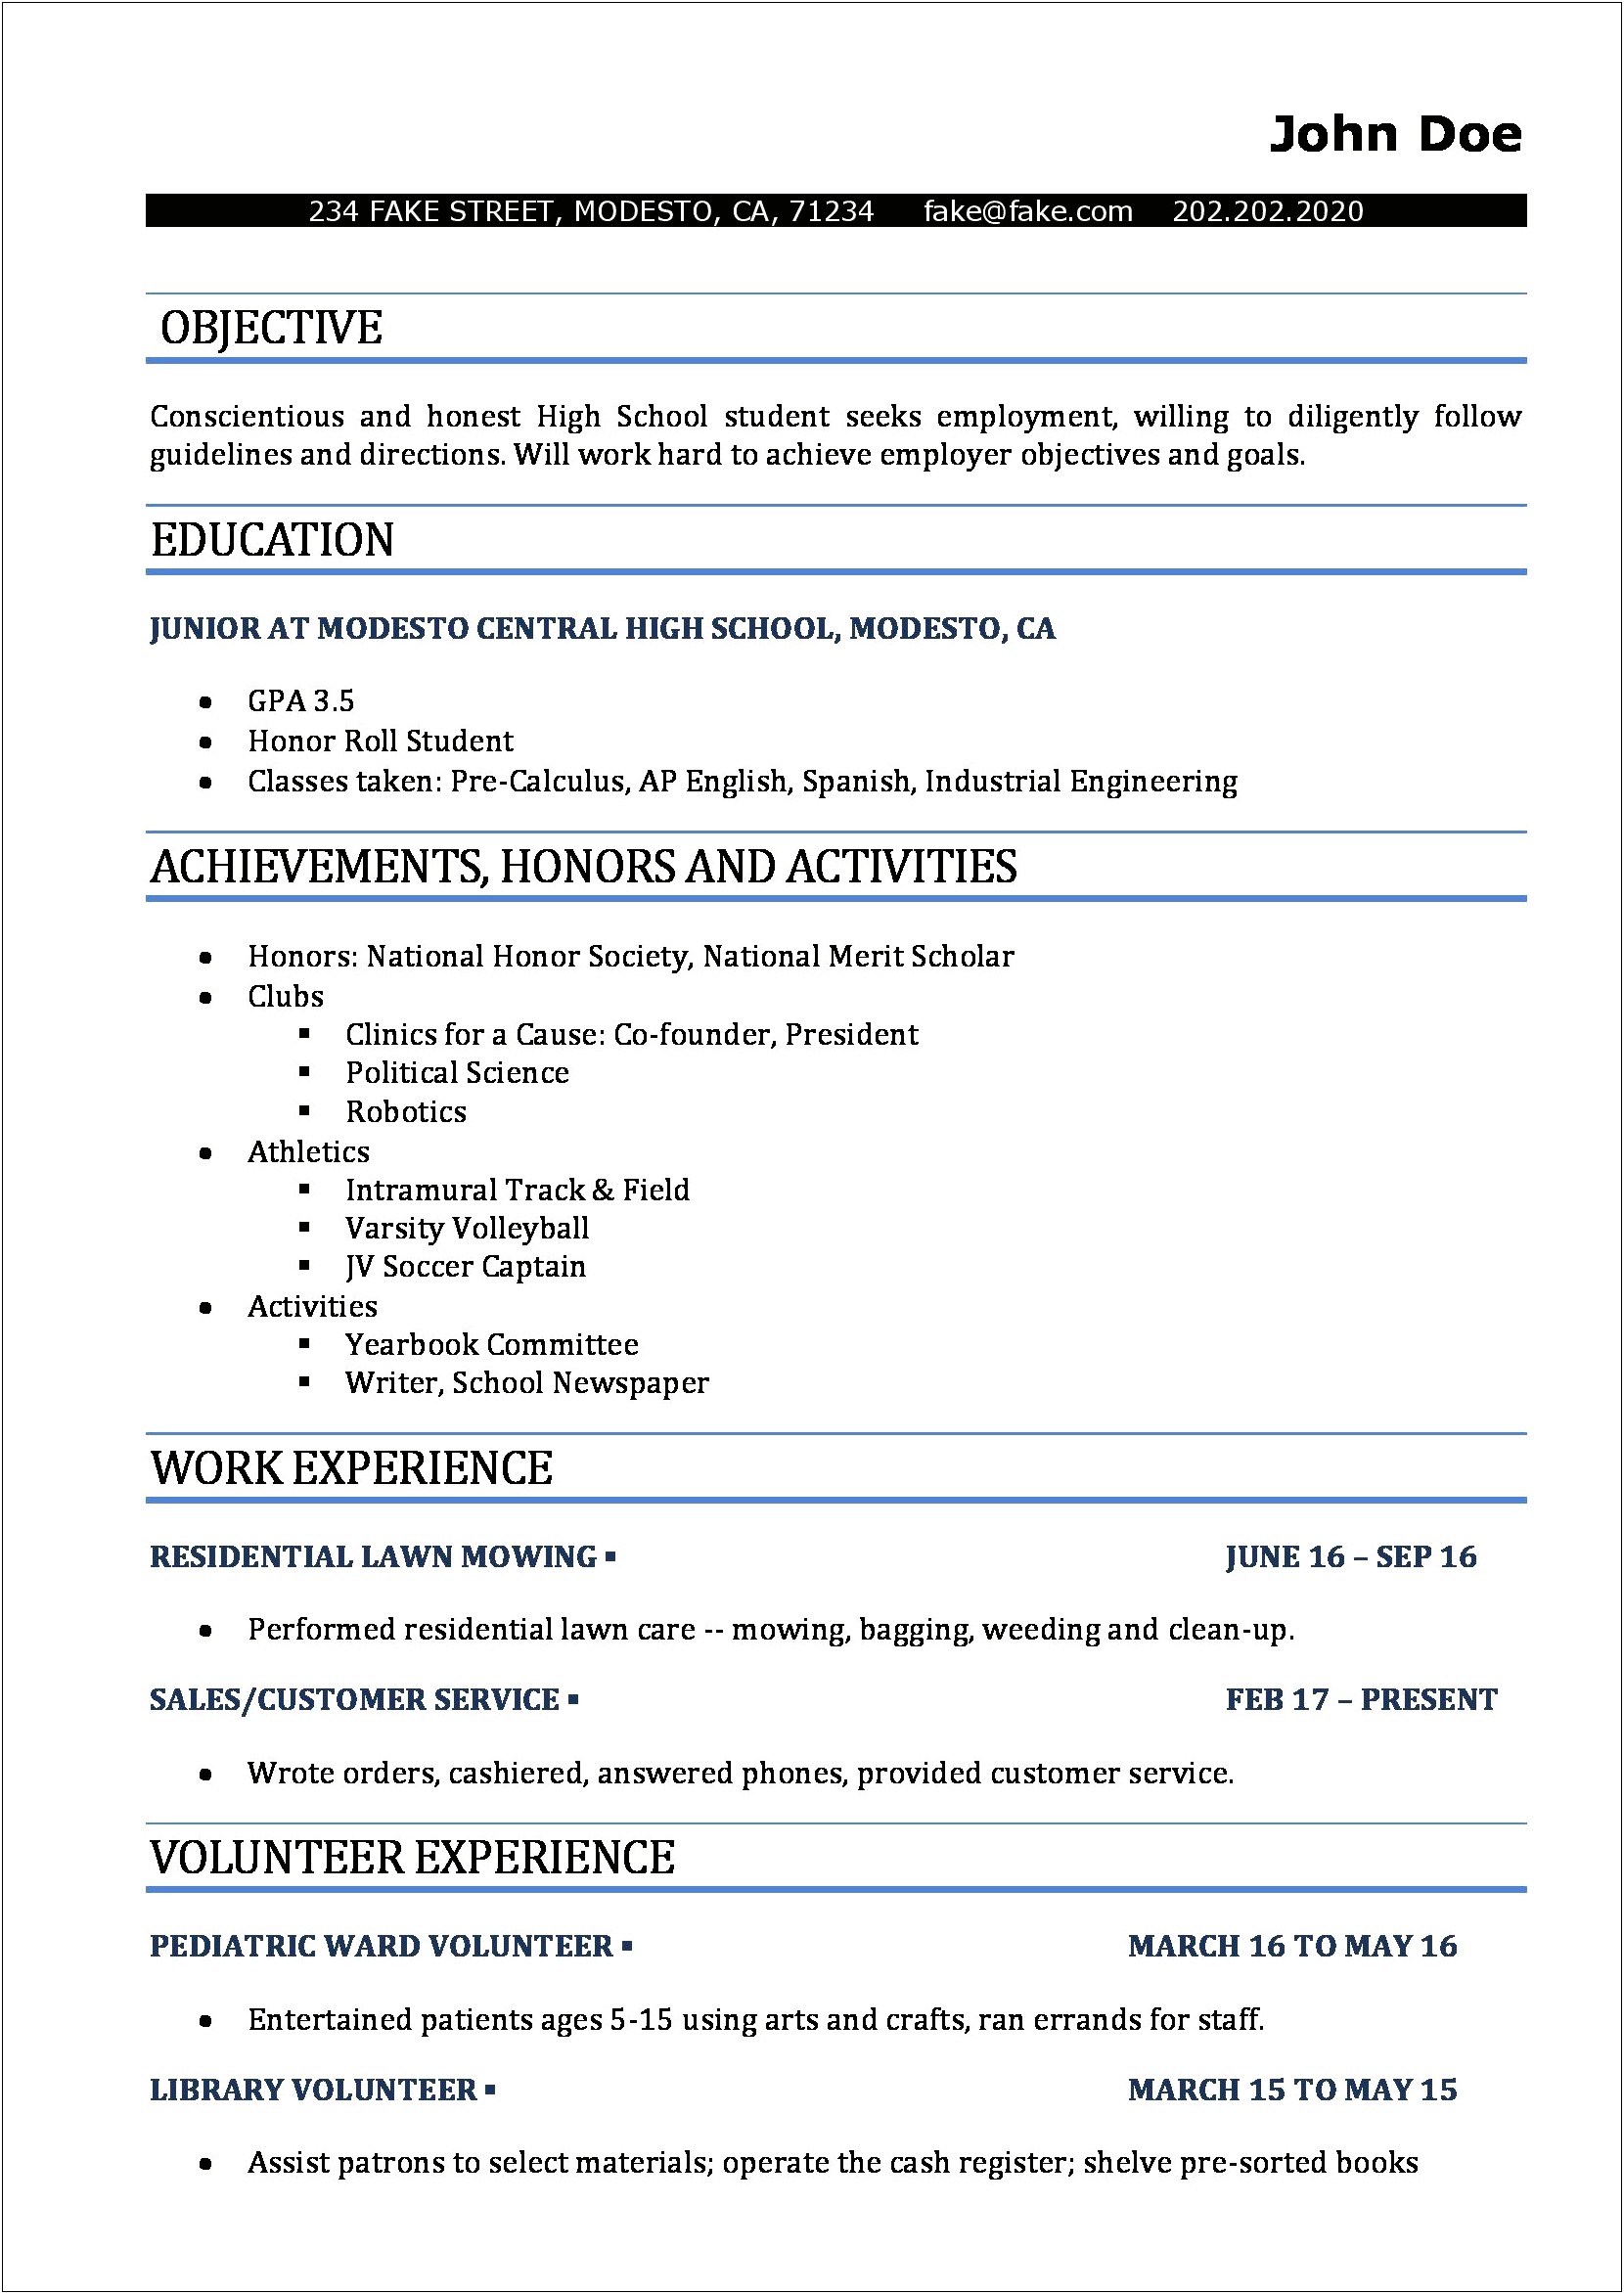 Examples Of Student Faking Resume